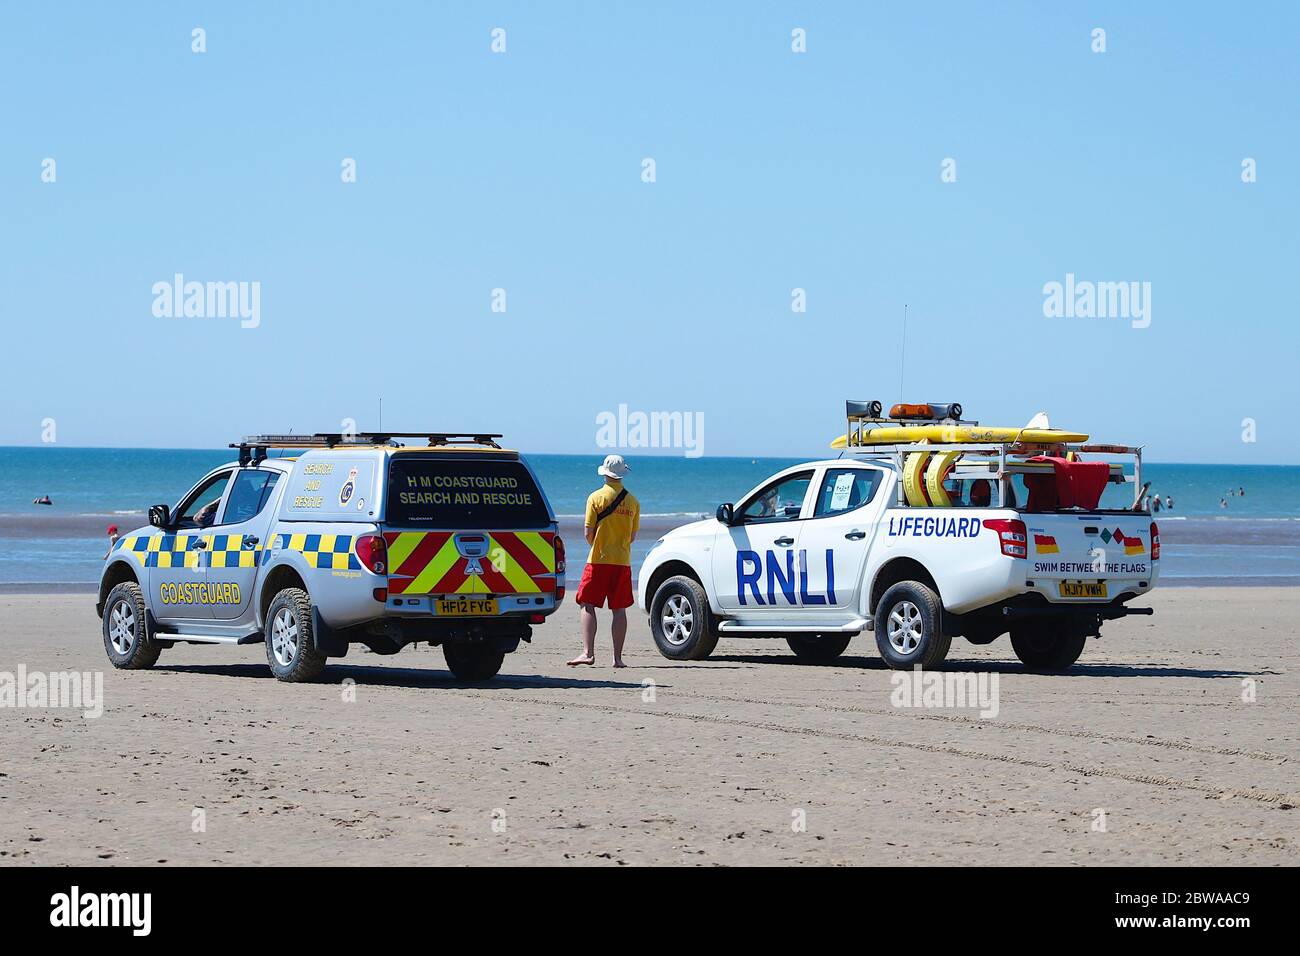 Camber, East Sussex, UK. 31 May, 2020. UK Weather: Another bright and very sunny day at Camber Sands, East Sussex. People arrive in their droves to lie on the golden fine sands where temperatures are expected to exceed 25 degrees Celsius. Coastguard and search and rescue vehicles keep a watchful eye. Photo Credit: Paul Lawrenson/Alamy Live News Stock Photo